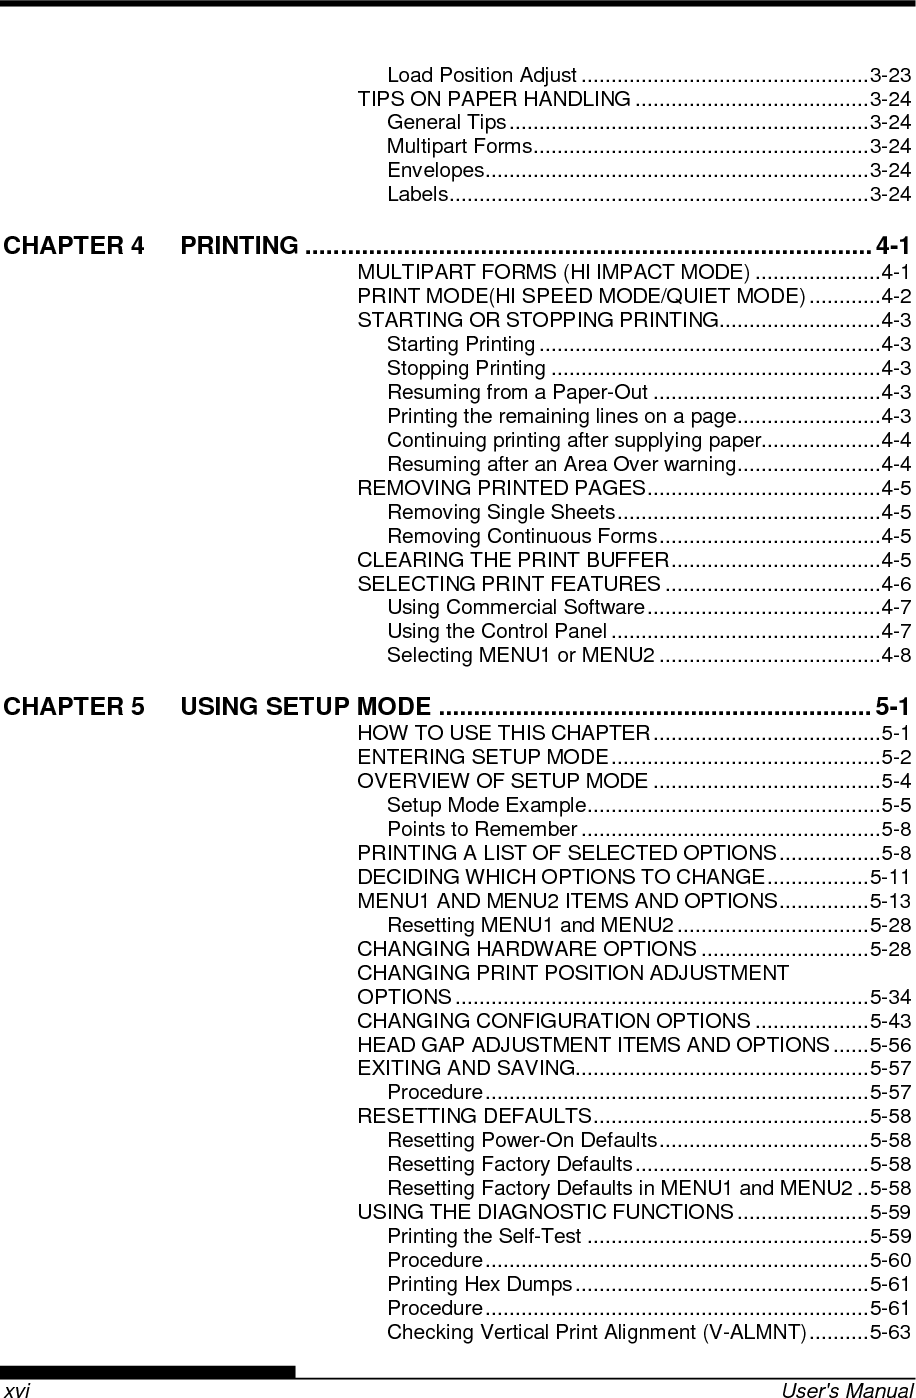    xvi  User&apos;s Manual Load Position Adjust ................................................ 3-23 TIPS ON PAPER HANDLING ....................................... 3-24 General Tips ............................................................ 3-24 Multipart Forms ........................................................ 3-24 Envelopes ................................................................ 3-24 Labels ...................................................................... 3-24 CHAPTER 4 PRINTING ................................................................................. 4-1 MULTIPART FORMS (HI IMPACT MODE) ..................... 4-1 PRINT MODE(HI SPEED MODE/QUIET MODE) ............ 4-2 STARTING OR STOPPING PRINTING ........................... 4-3 Starting Printing ......................................................... 4-3 Stopping Printing ....................................................... 4-3 Resuming from a Paper-Out ...................................... 4-3 Printing the remaining lines on a page ........................ 4-3 Continuing printing after supplying paper.................... 4-4 Resuming after an Area Over warning ........................ 4-4 REMOVING PRINTED PAGES ....................................... 4-5 Removing Single Sheets ............................................ 4-5 Removing Continuous Forms ..................................... 4-5 CLEARING THE PRINT BUFFER ................................... 4-5 SELECTING PRINT FEATURES .................................... 4-6 Using Commercial Software ....................................... 4-7 Using the Control Panel ............................................. 4-7 Selecting MENU1 or MENU2 ..................................... 4-8 CHAPTER 5 USING SETUP MODE .............................................................. 5-1 HOW TO USE THIS CHAPTER ...................................... 5-1 ENTERING SETUP MODE ............................................. 5-2 OVERVIEW OF SETUP MODE ...................................... 5-4 Setup Mode Example ................................................. 5-5 Points to Remember .................................................. 5-8 PRINTING A LIST OF SELECTED OPTIONS ................. 5-8 DECIDING WHICH OPTIONS TO CHANGE ................. 5-11 MENU1 AND MENU2 ITEMS AND OPTIONS ............... 5-13 Resetting MENU1 and MENU2 ................................ 5-28 CHANGING HARDWARE OPTIONS ............................ 5-28 CHANGING PRINT POSITION ADJUSTMENT OPTIONS ..................................................................... 5-34 CHANGING CONFIGURATION OPTIONS ................... 5-43 HEAD GAP ADJUSTMENT ITEMS AND OPTIONS ...... 5-56 EXITING AND SAVING................................................. 5-57 Procedure ................................................................ 5-57 RESETTING DEFAULTS .............................................. 5-58 Resetting Power-On Defaults ................................... 5-58 Resetting Factory Defaults ....................................... 5-58 Resetting Factory Defaults in MENU1 and MENU2 .. 5-58 USING THE DIAGNOSTIC FUNCTIONS ...................... 5-59 Printing the Self-Test ............................................... 5-59 Procedure ................................................................ 5-60 Printing Hex Dumps ................................................. 5-61 Procedure ................................................................ 5-61 Checking Vertical Print Alignment (V-ALMNT) .......... 5-63 